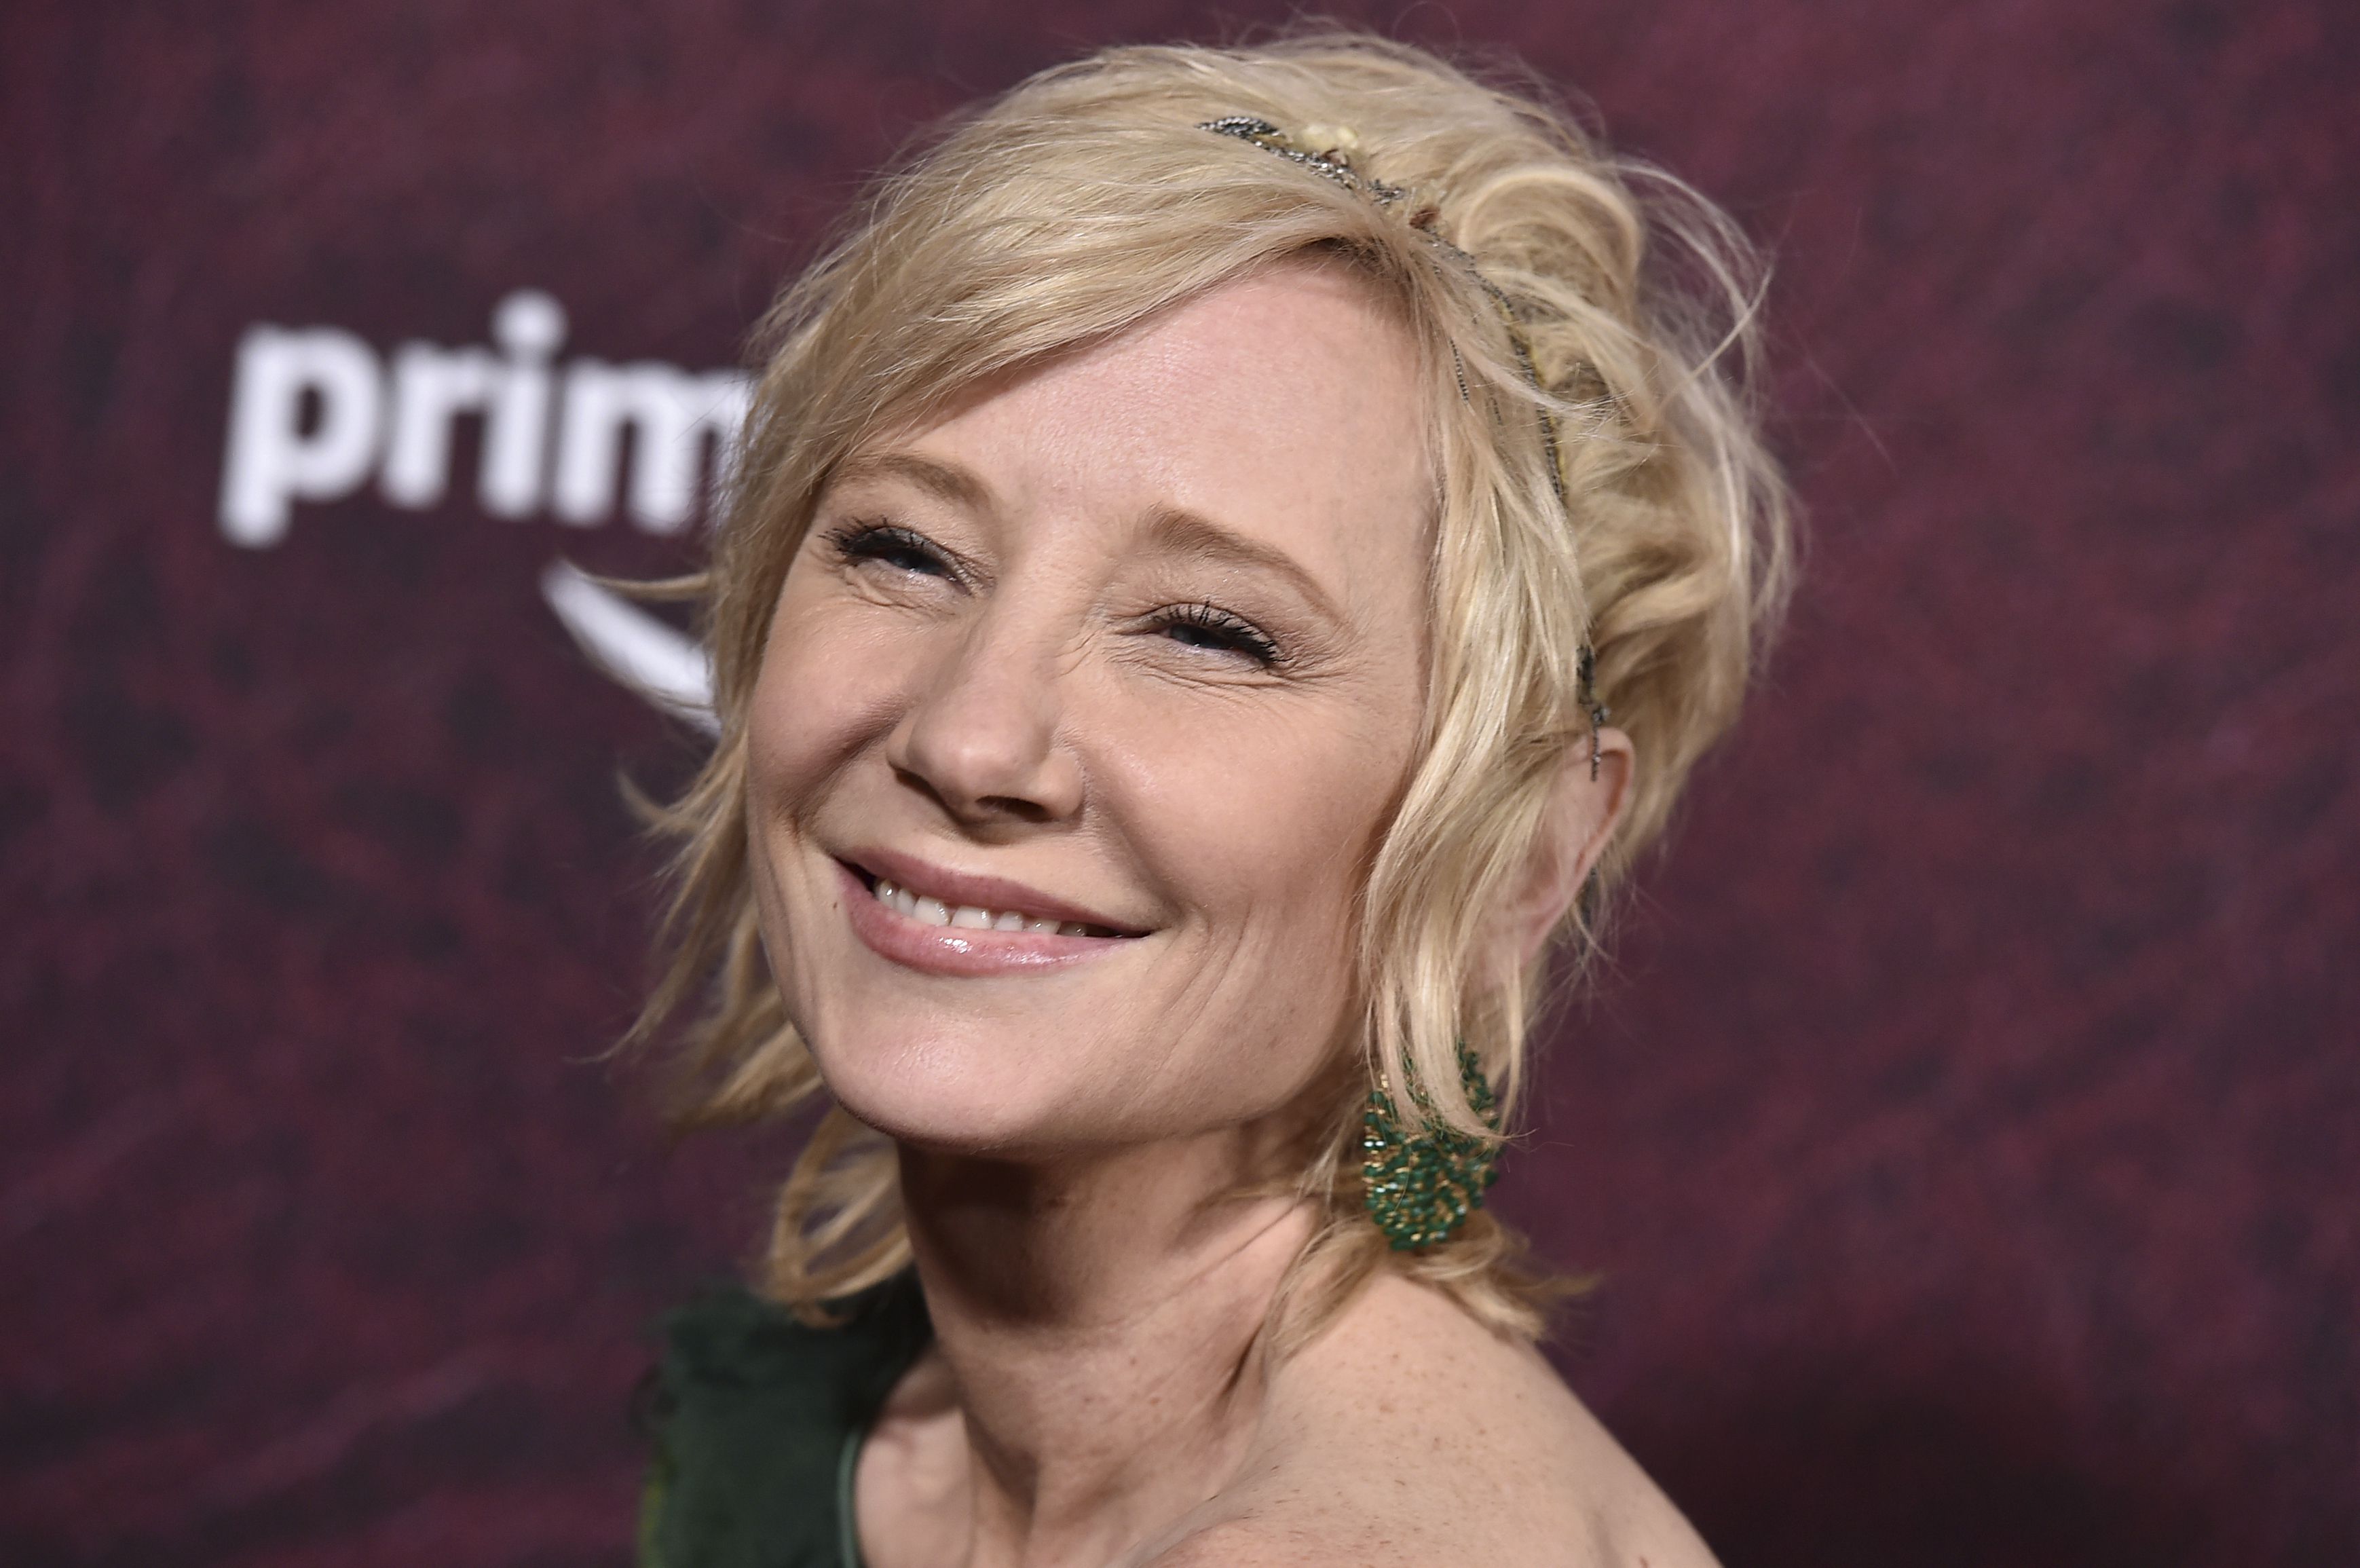 Anne Heche died without a will, son files to control estate